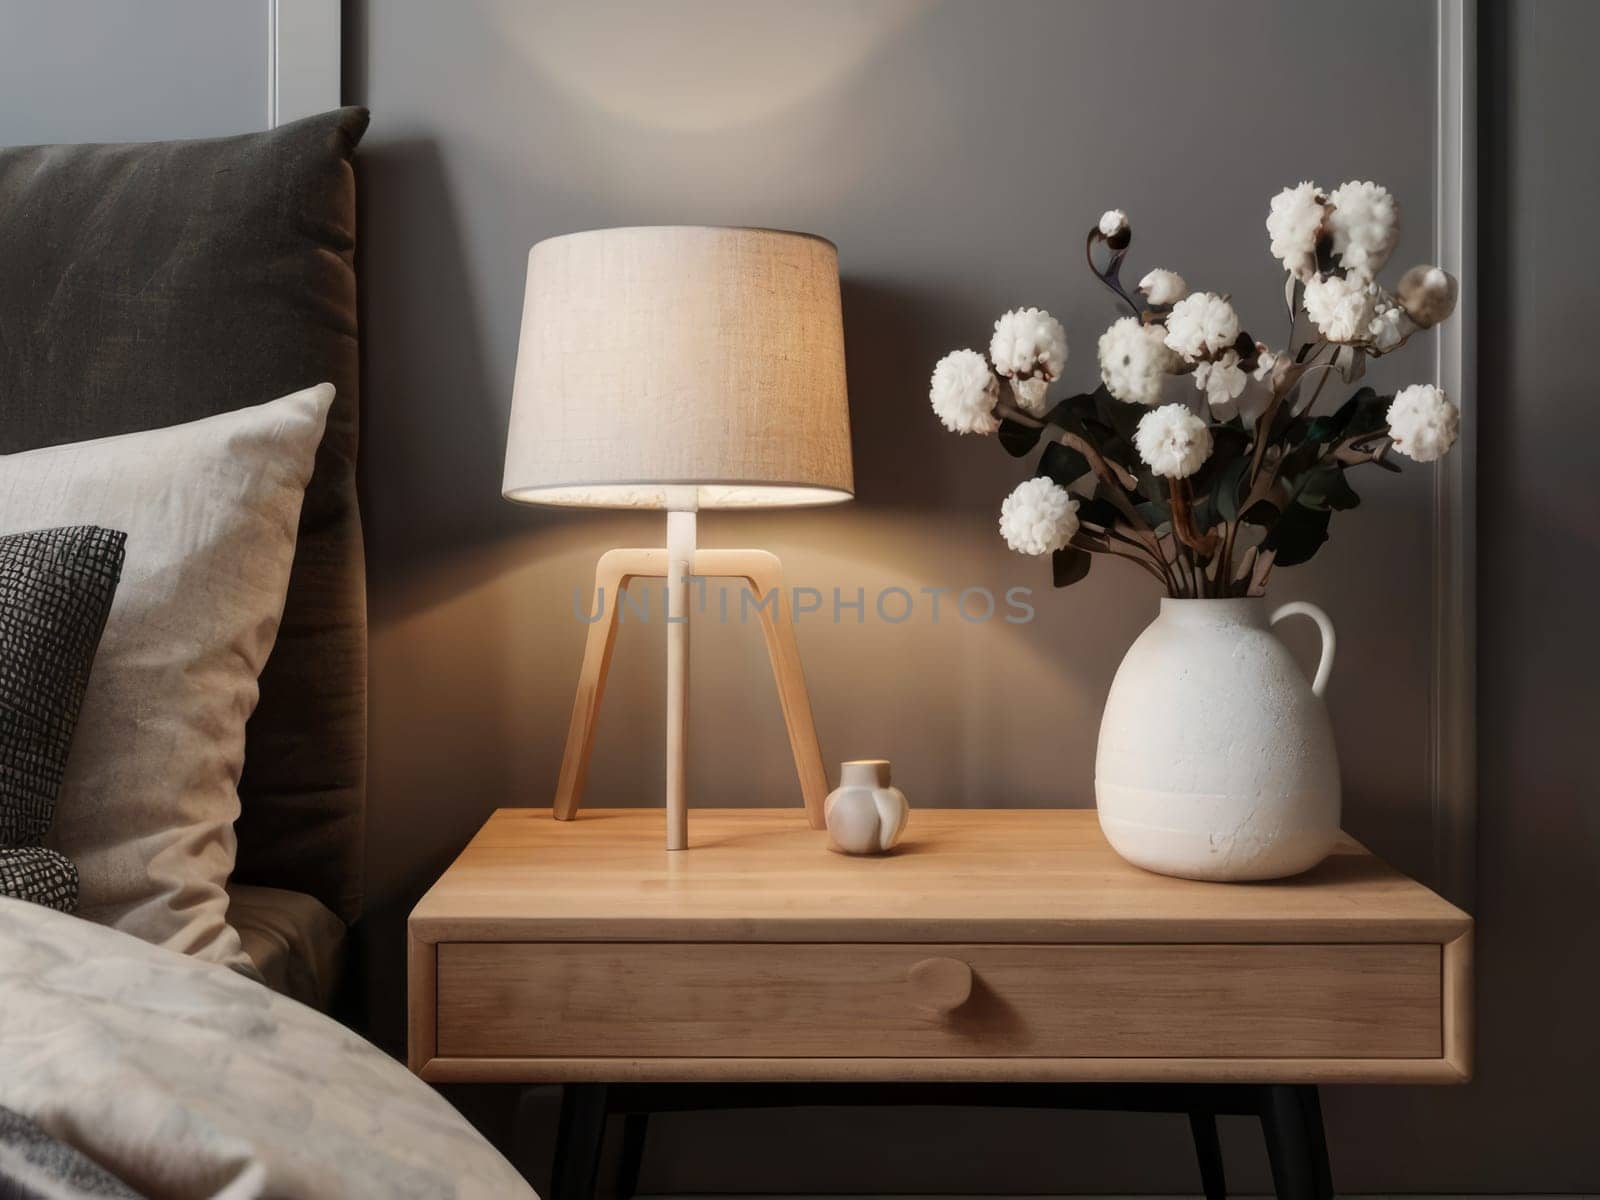 Elegant nightstand featuring a lamp and a vase of flowers, illuminating the tranquil bedroom. Scandinavian-inspired home decor. by Annu1tochka